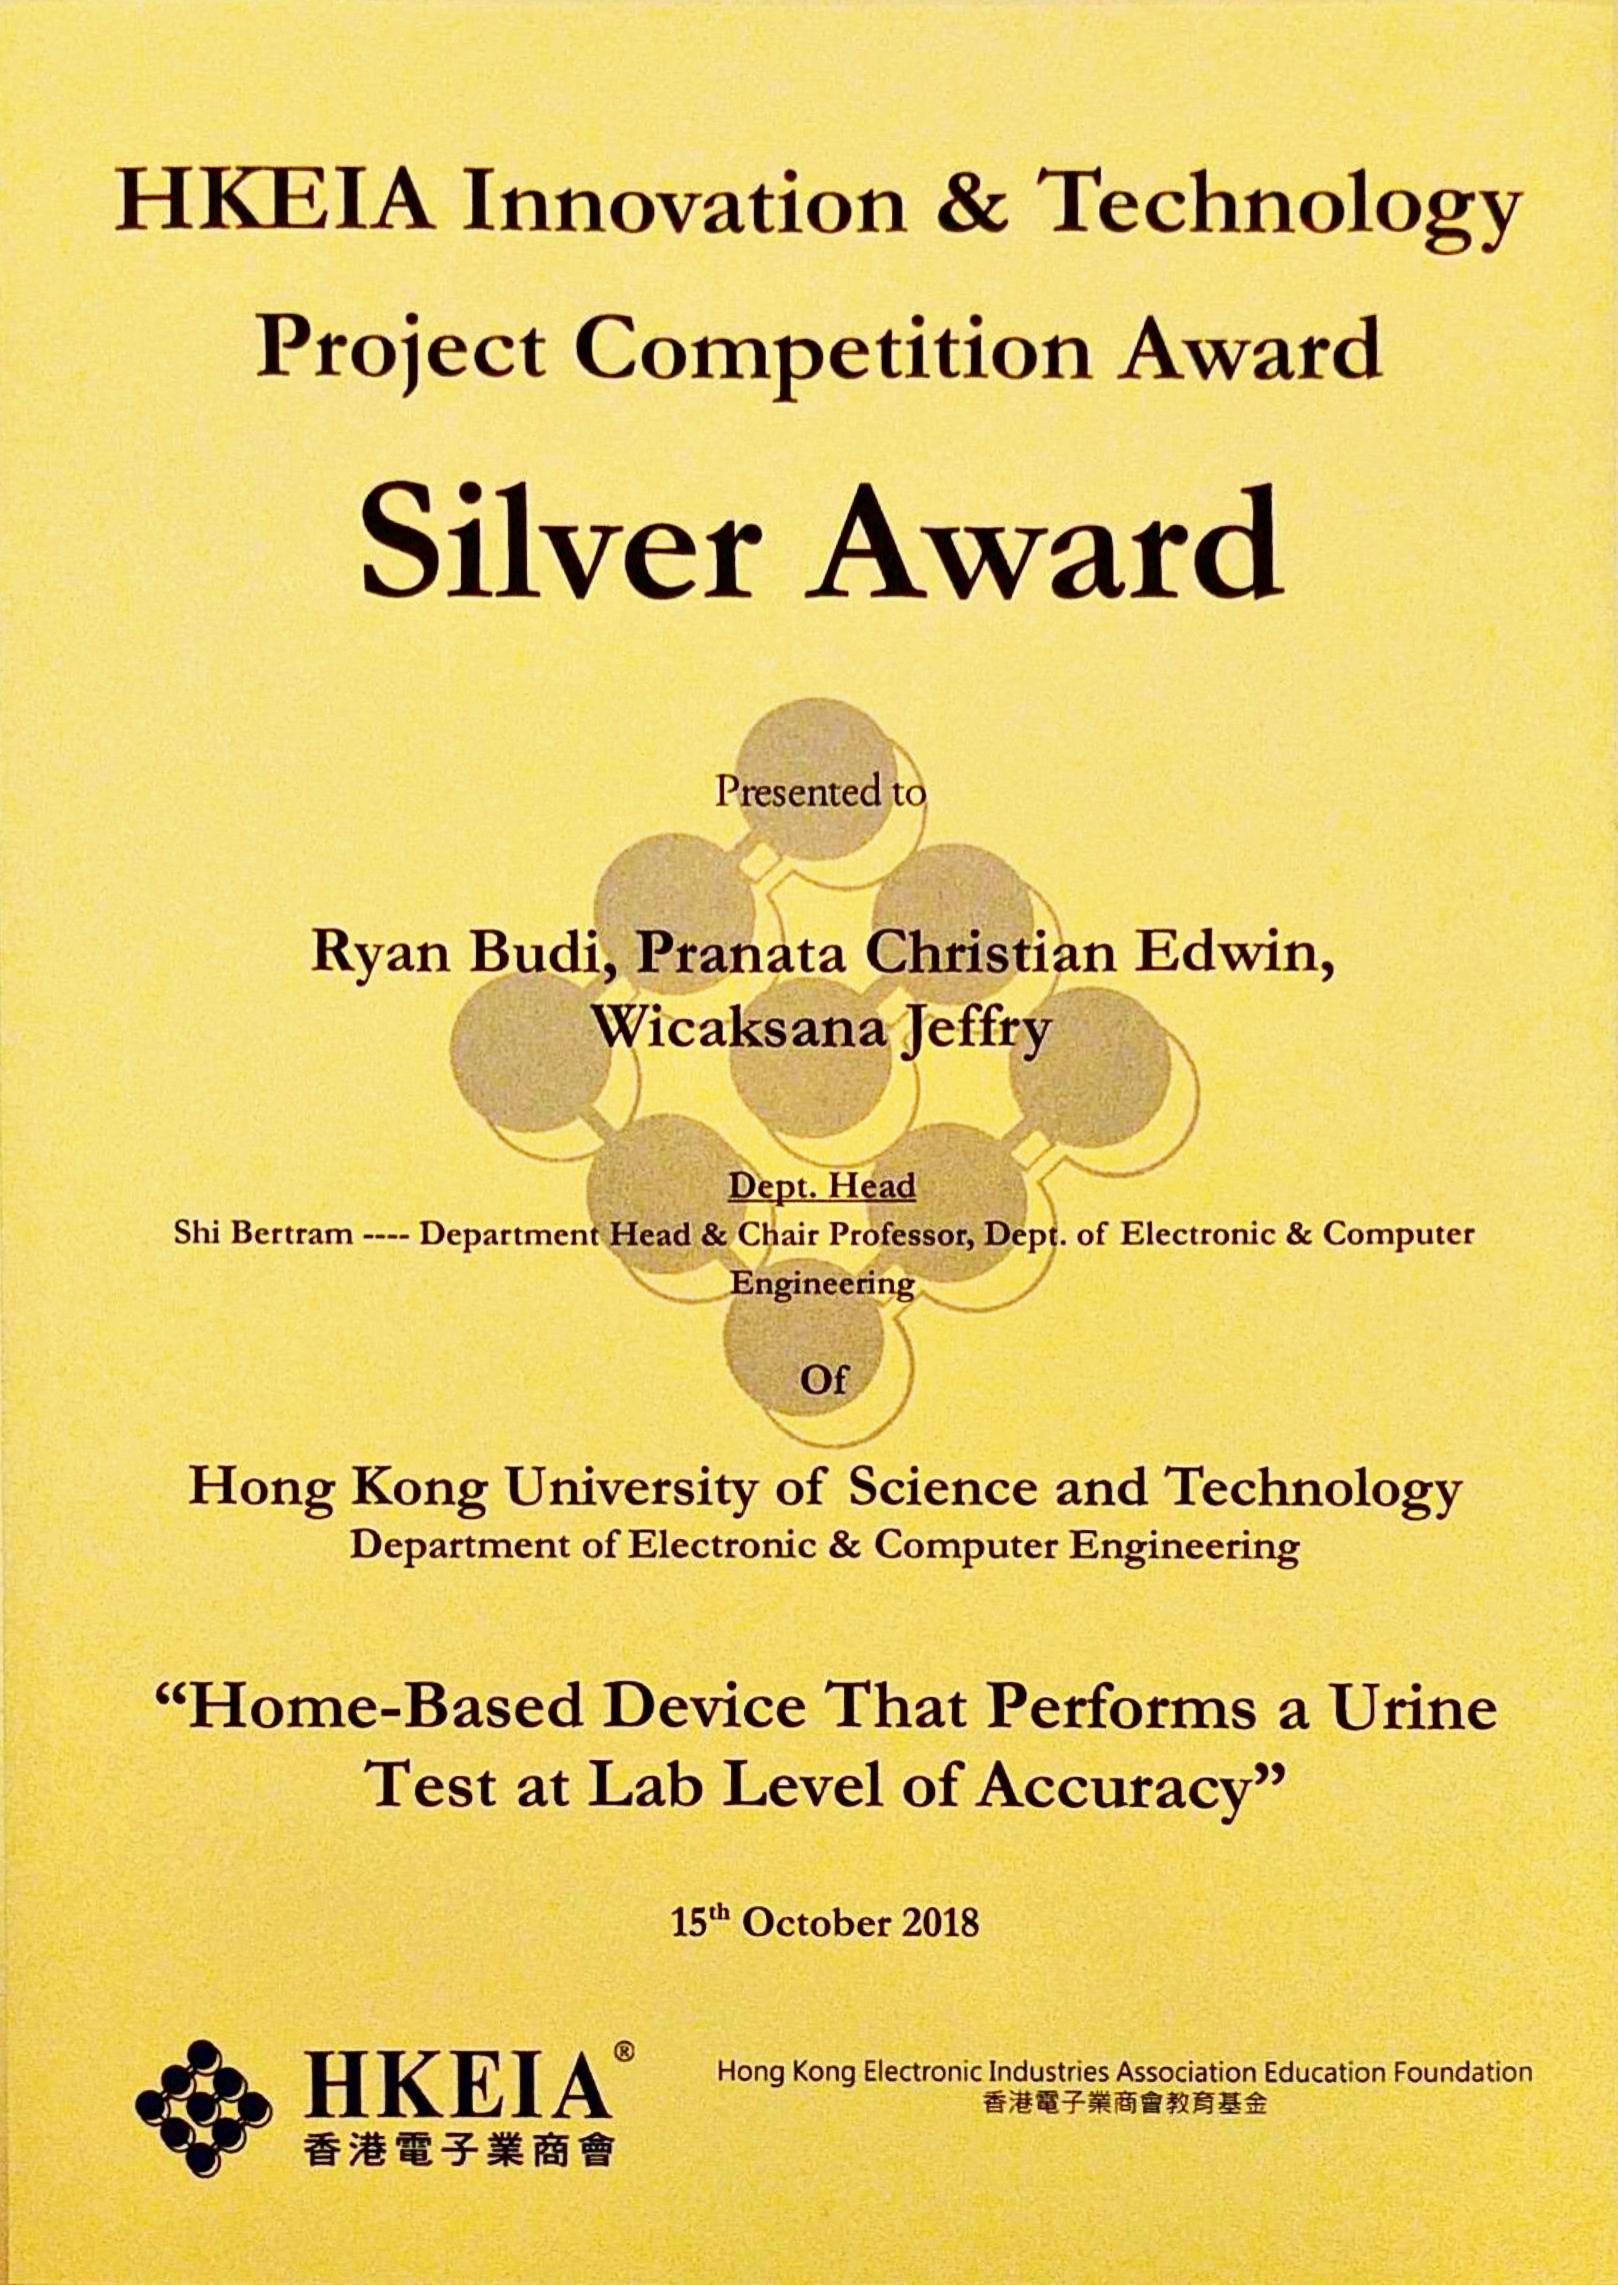 Final Year Project Won the Silver Prize of HKEIA Innovation & Technology Project Competition Award 2018